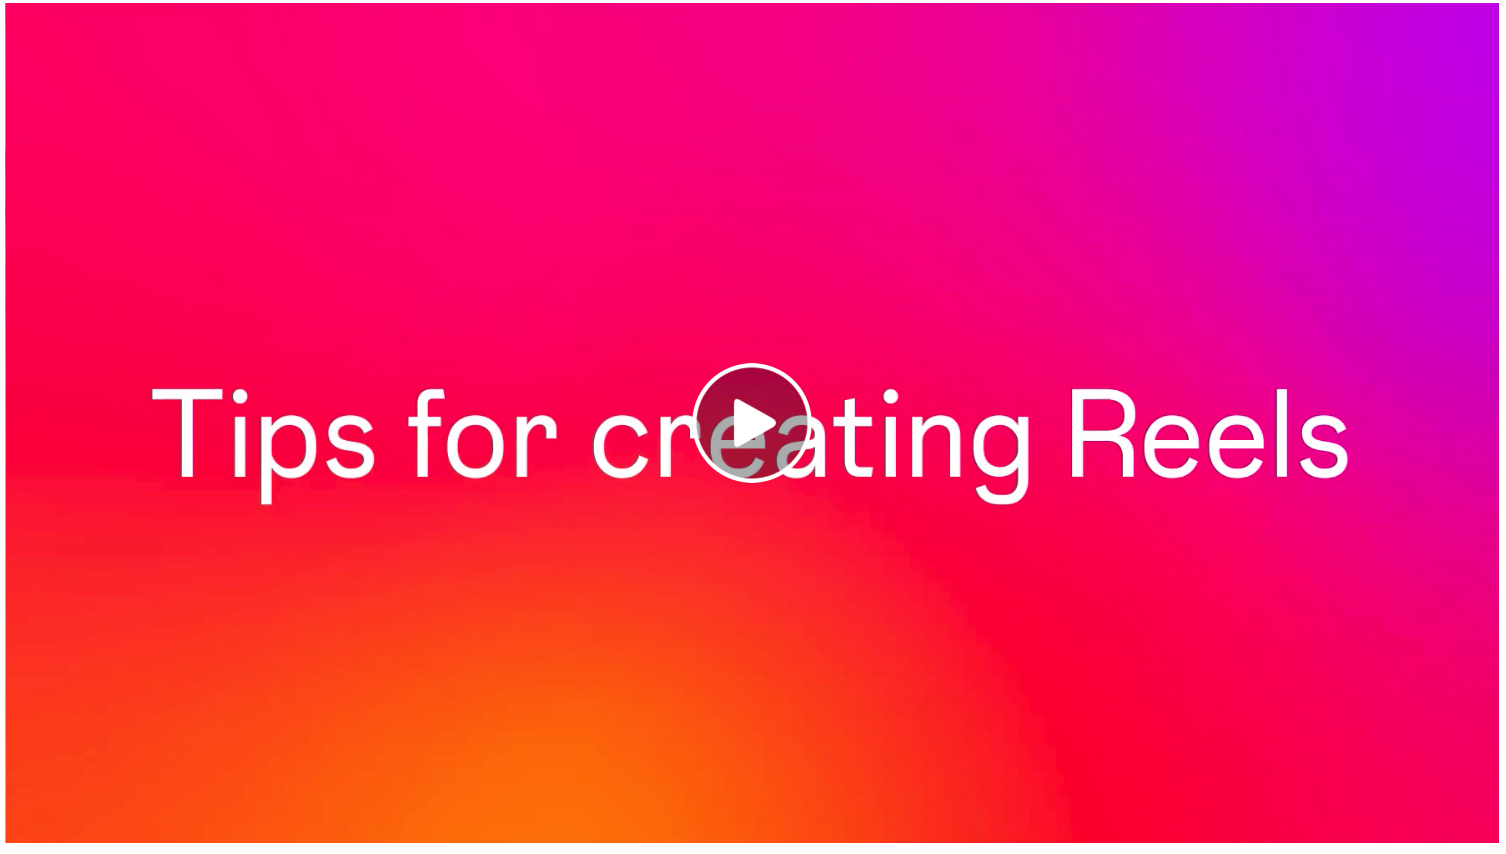 Tips to create engaging Reels